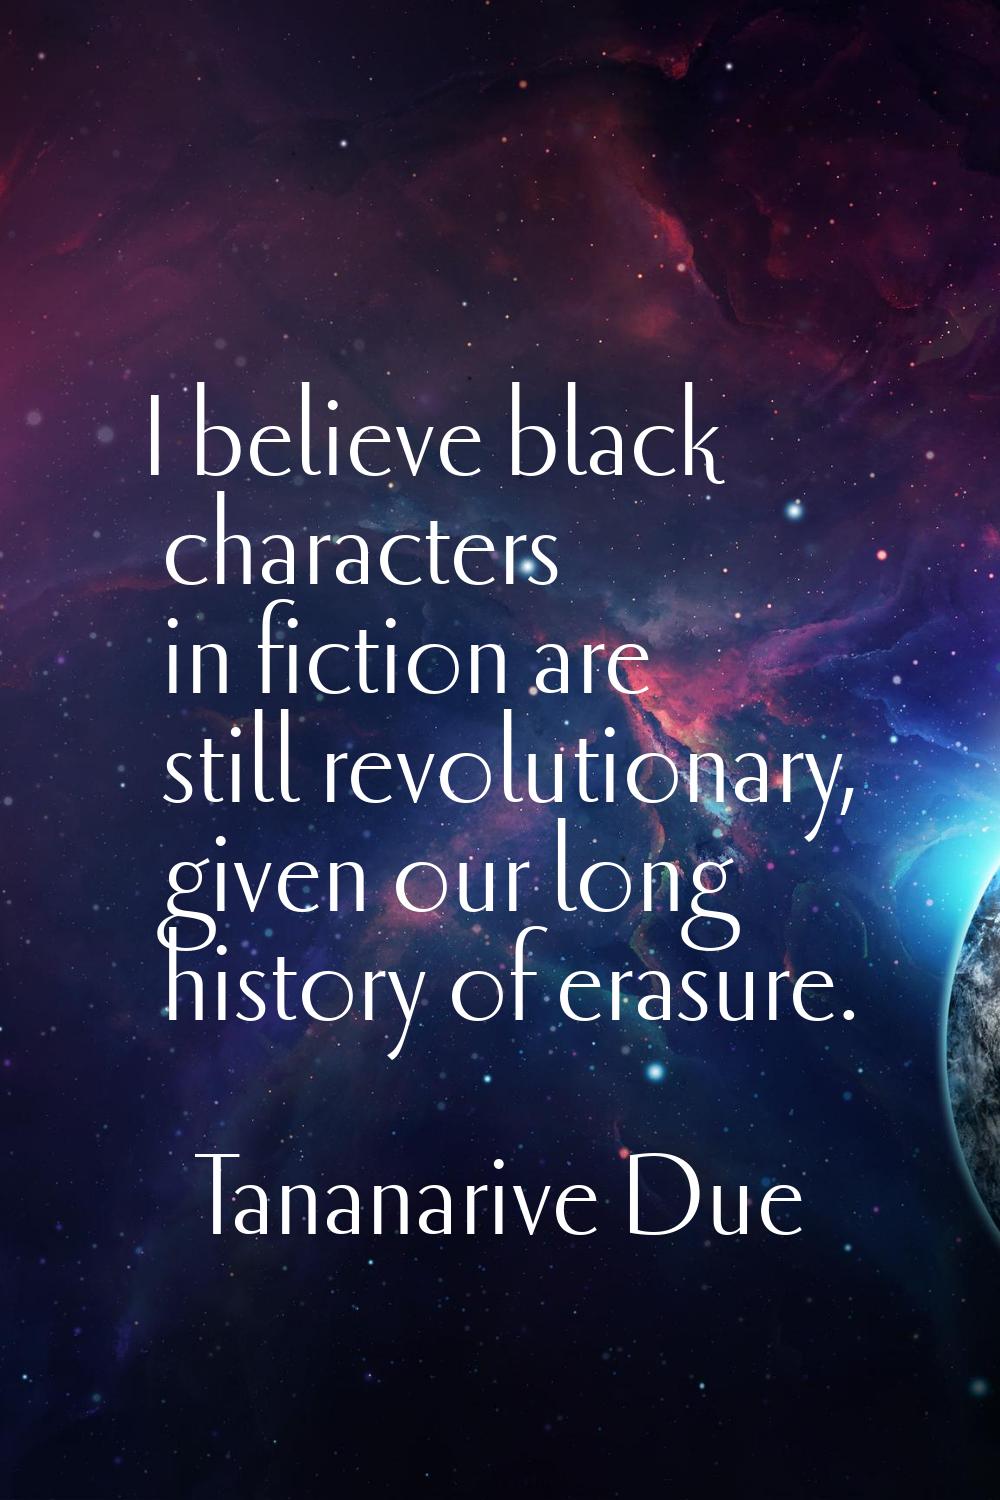 I believe black characters in fiction are still revolutionary, given our long history of erasure.